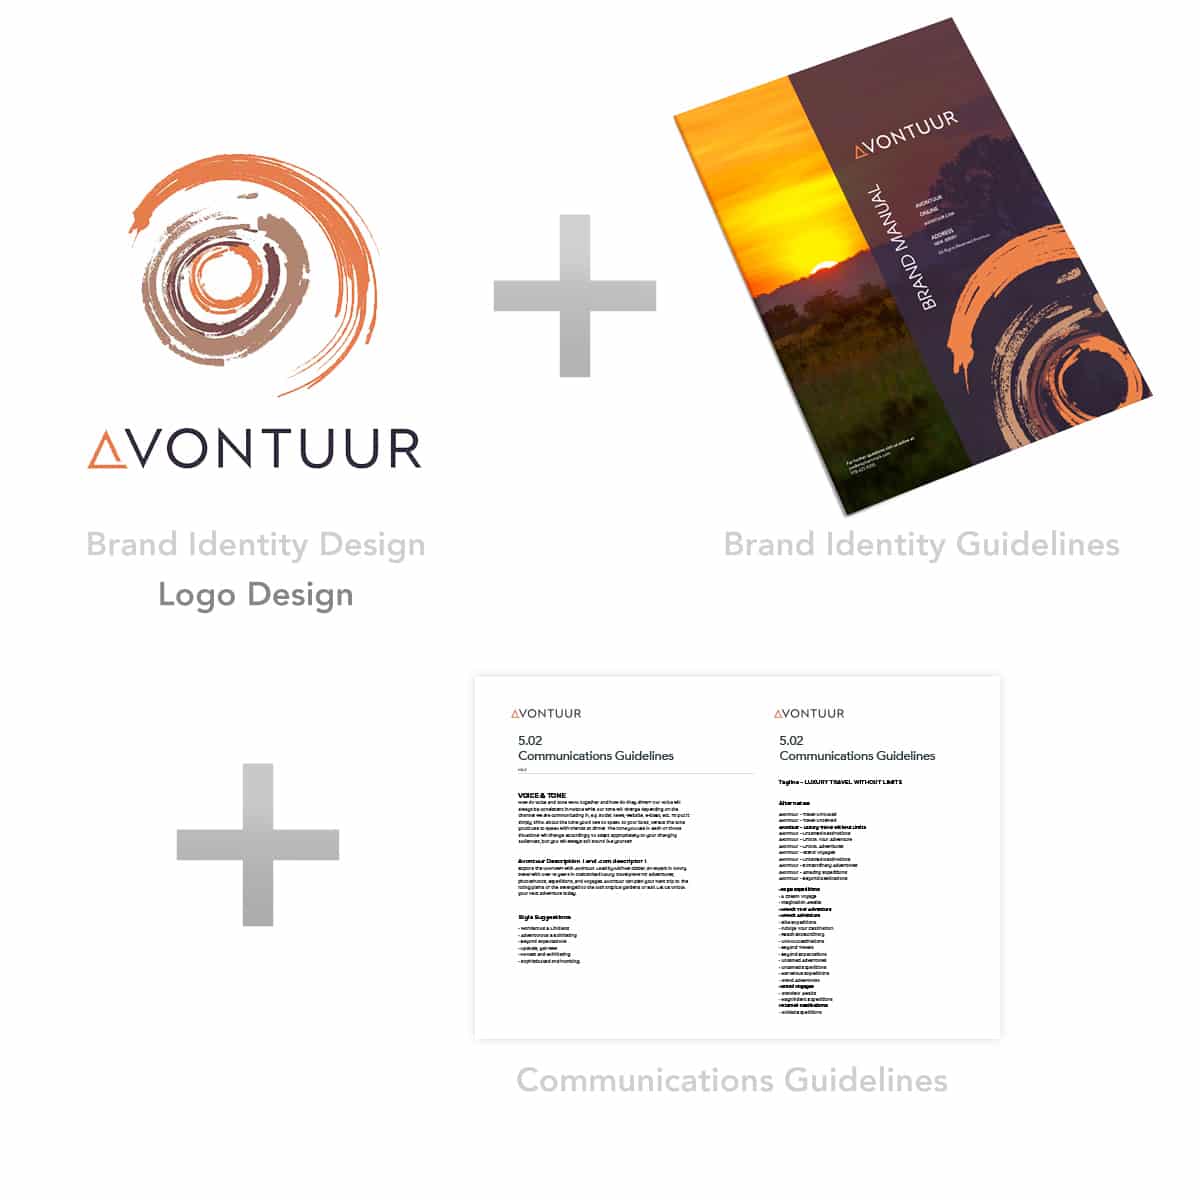 Brand Identity Design + Brand Identity Guidelines + Communications Guidelines